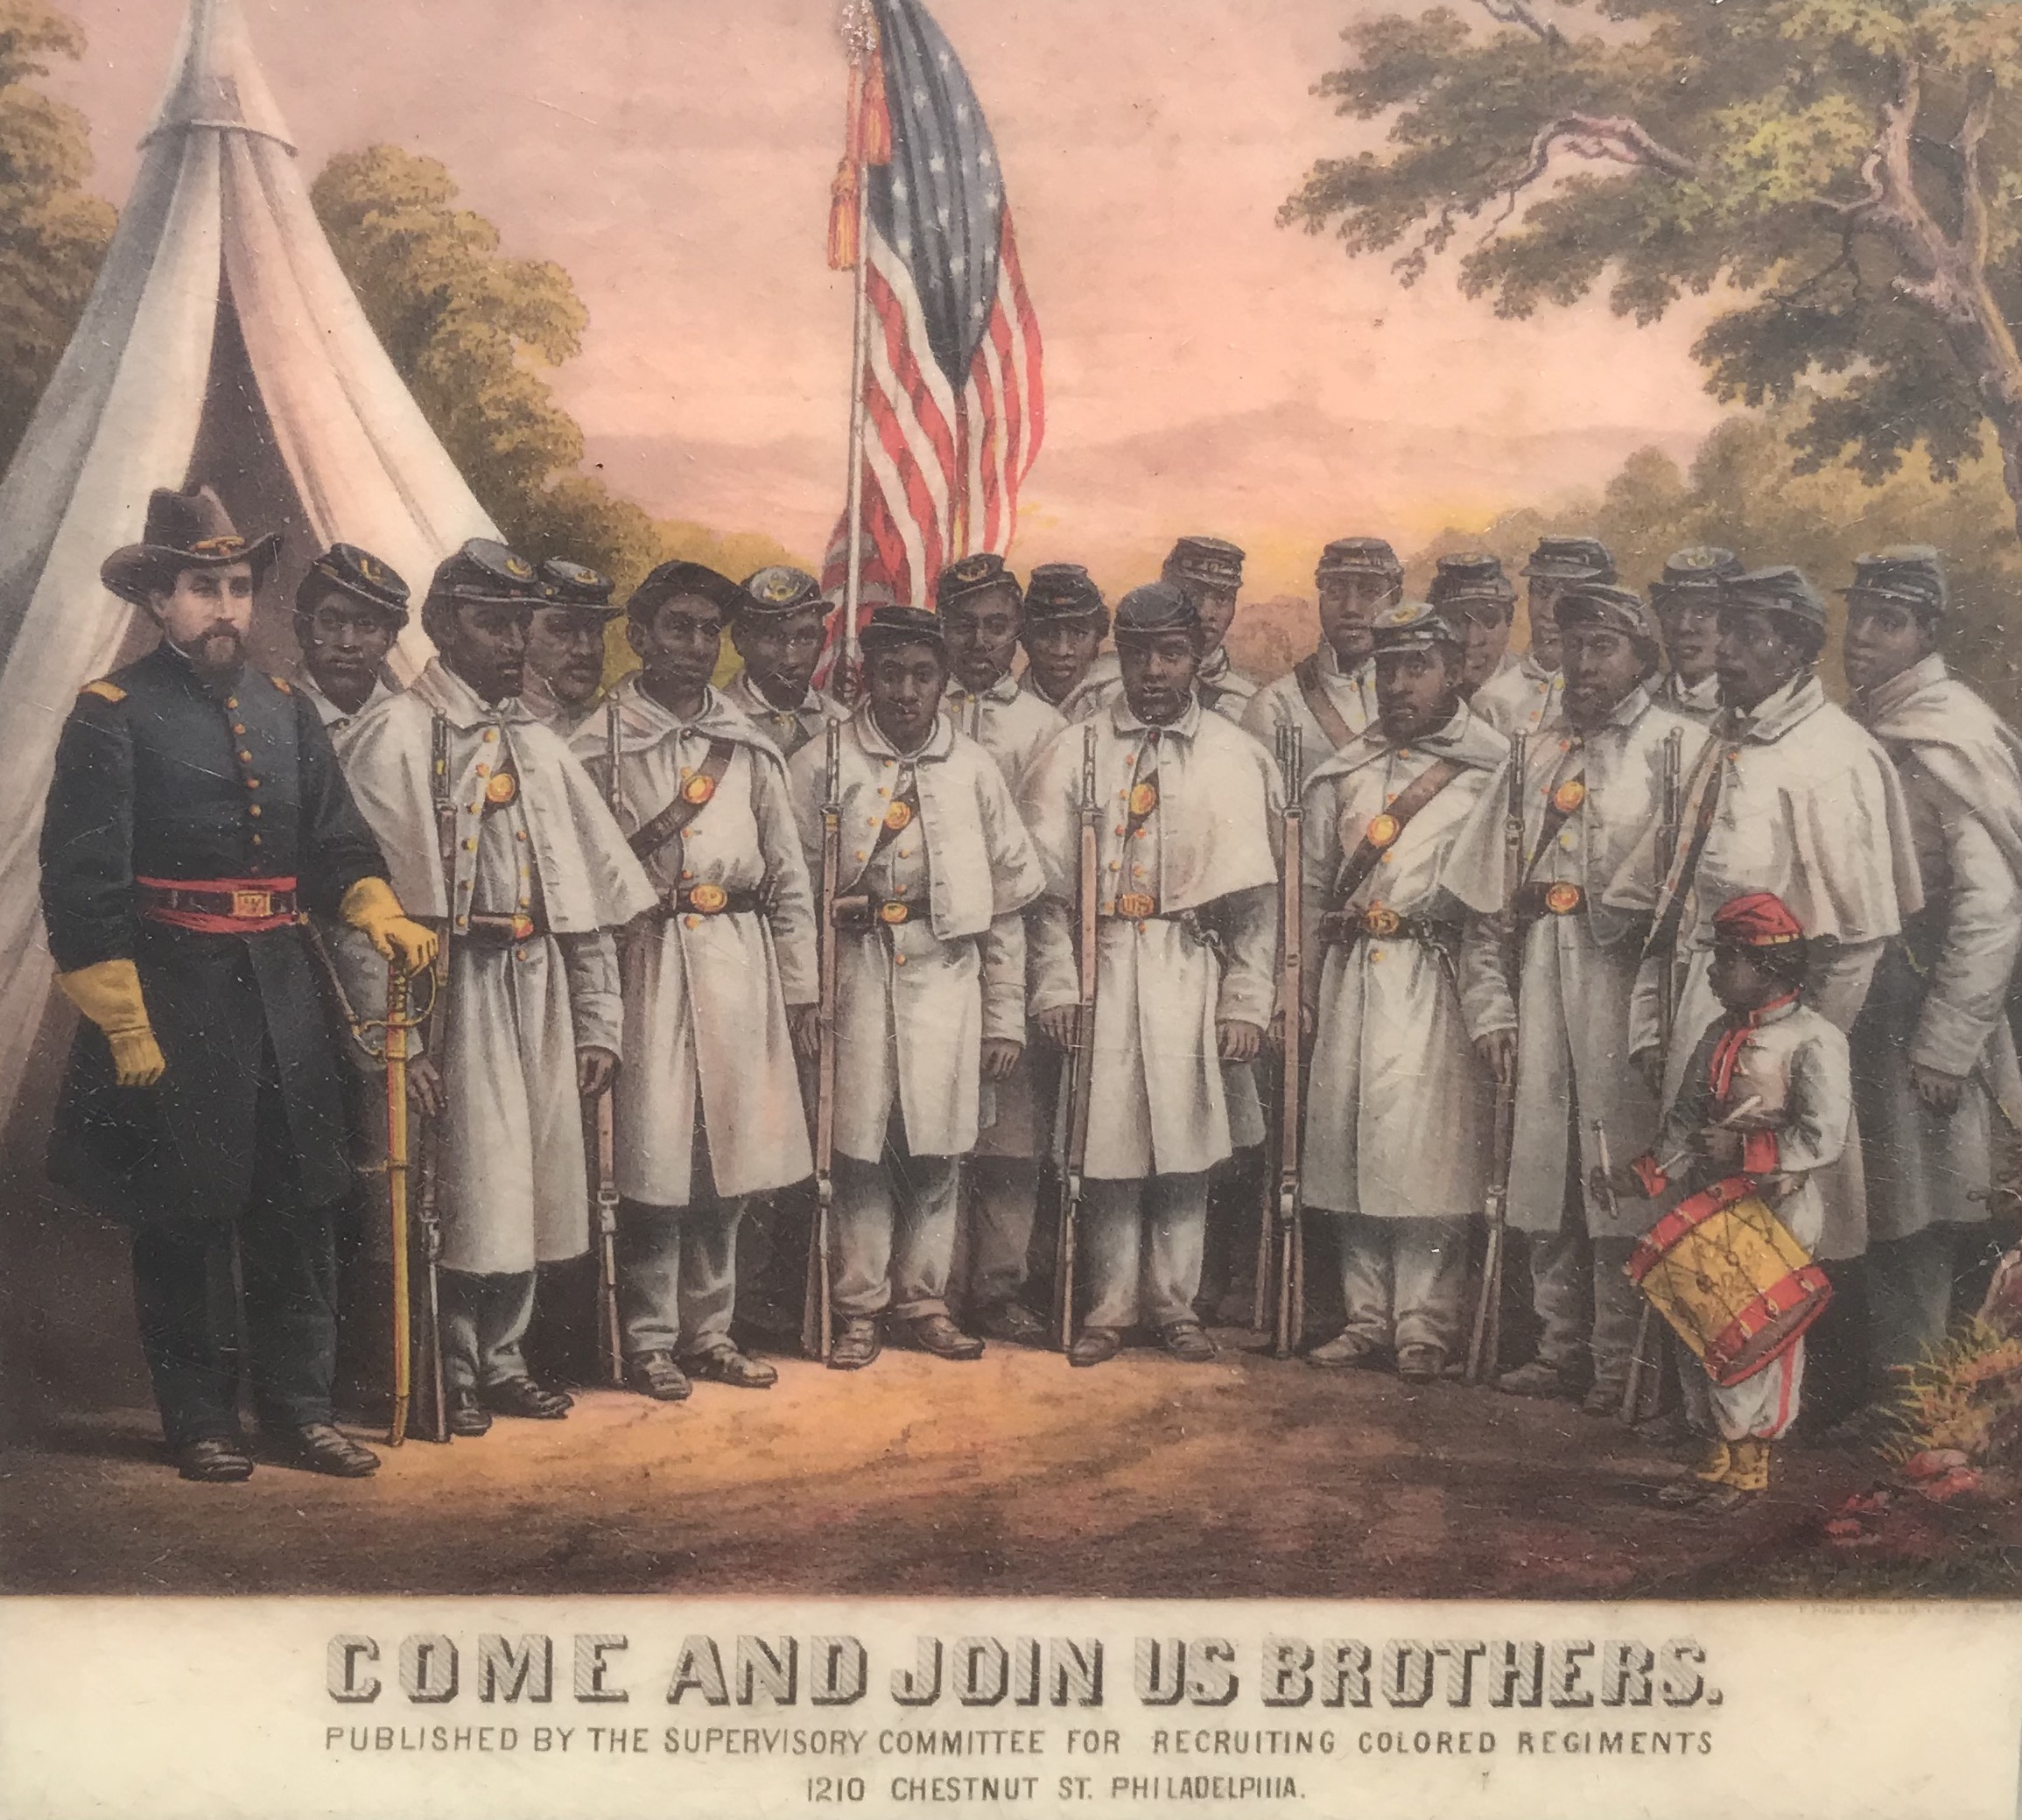  As general, Grant embraced Lincoln's vision, becoming the first to send "colored regiments" into battle. 